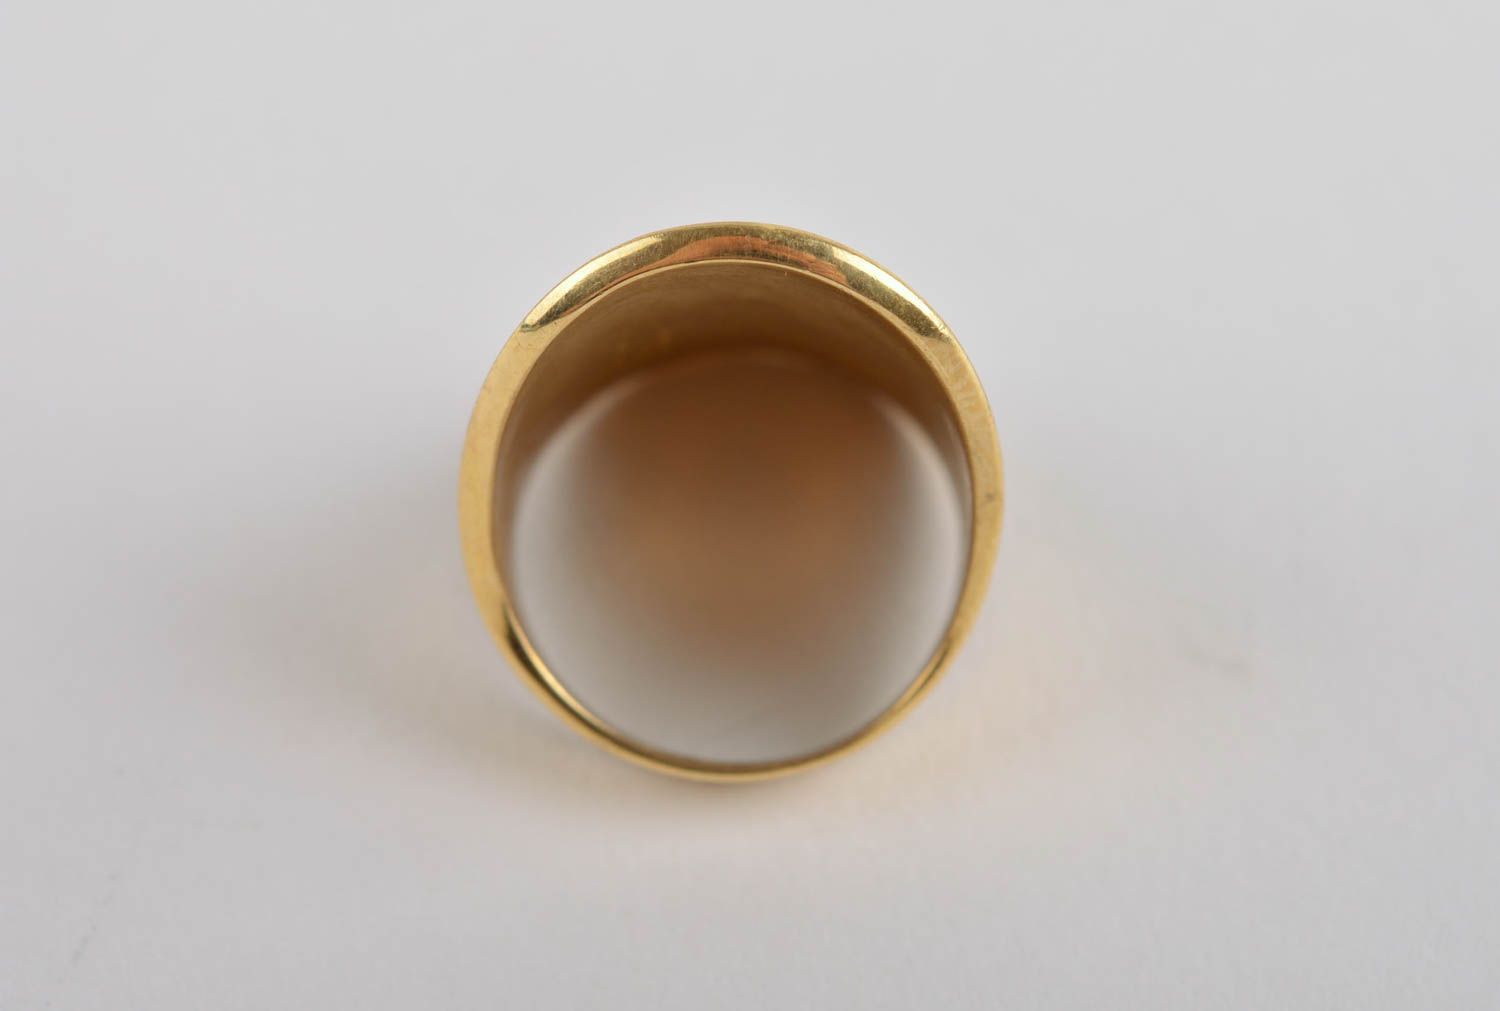 Fashion ring handmade brass ring with natural stones elegant jewelry metal ring photo 4